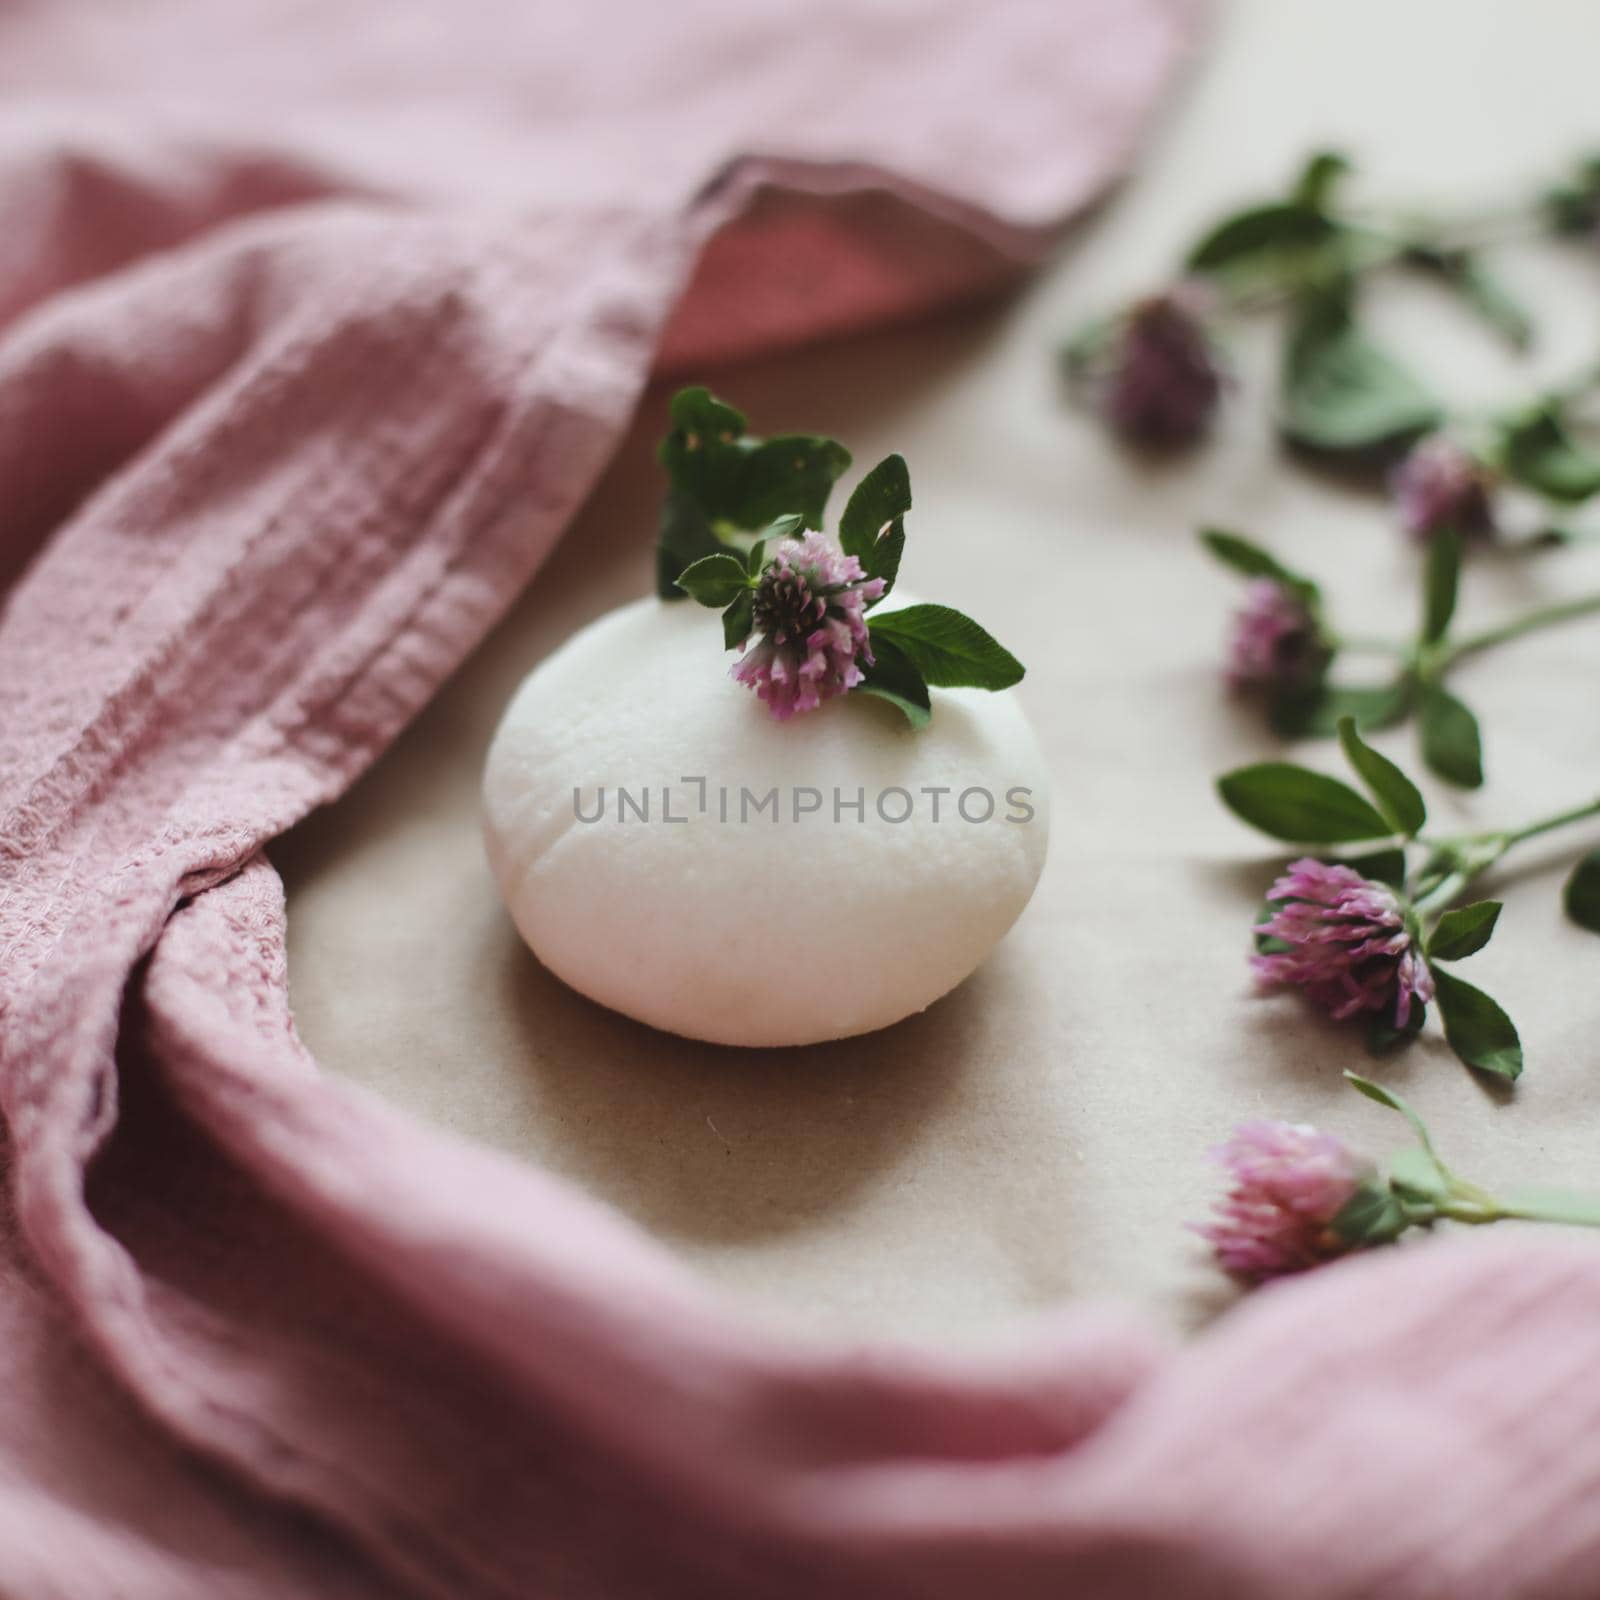 Handmade natural organic soap with flowers and pink towel on craft paper background top view with copyspace